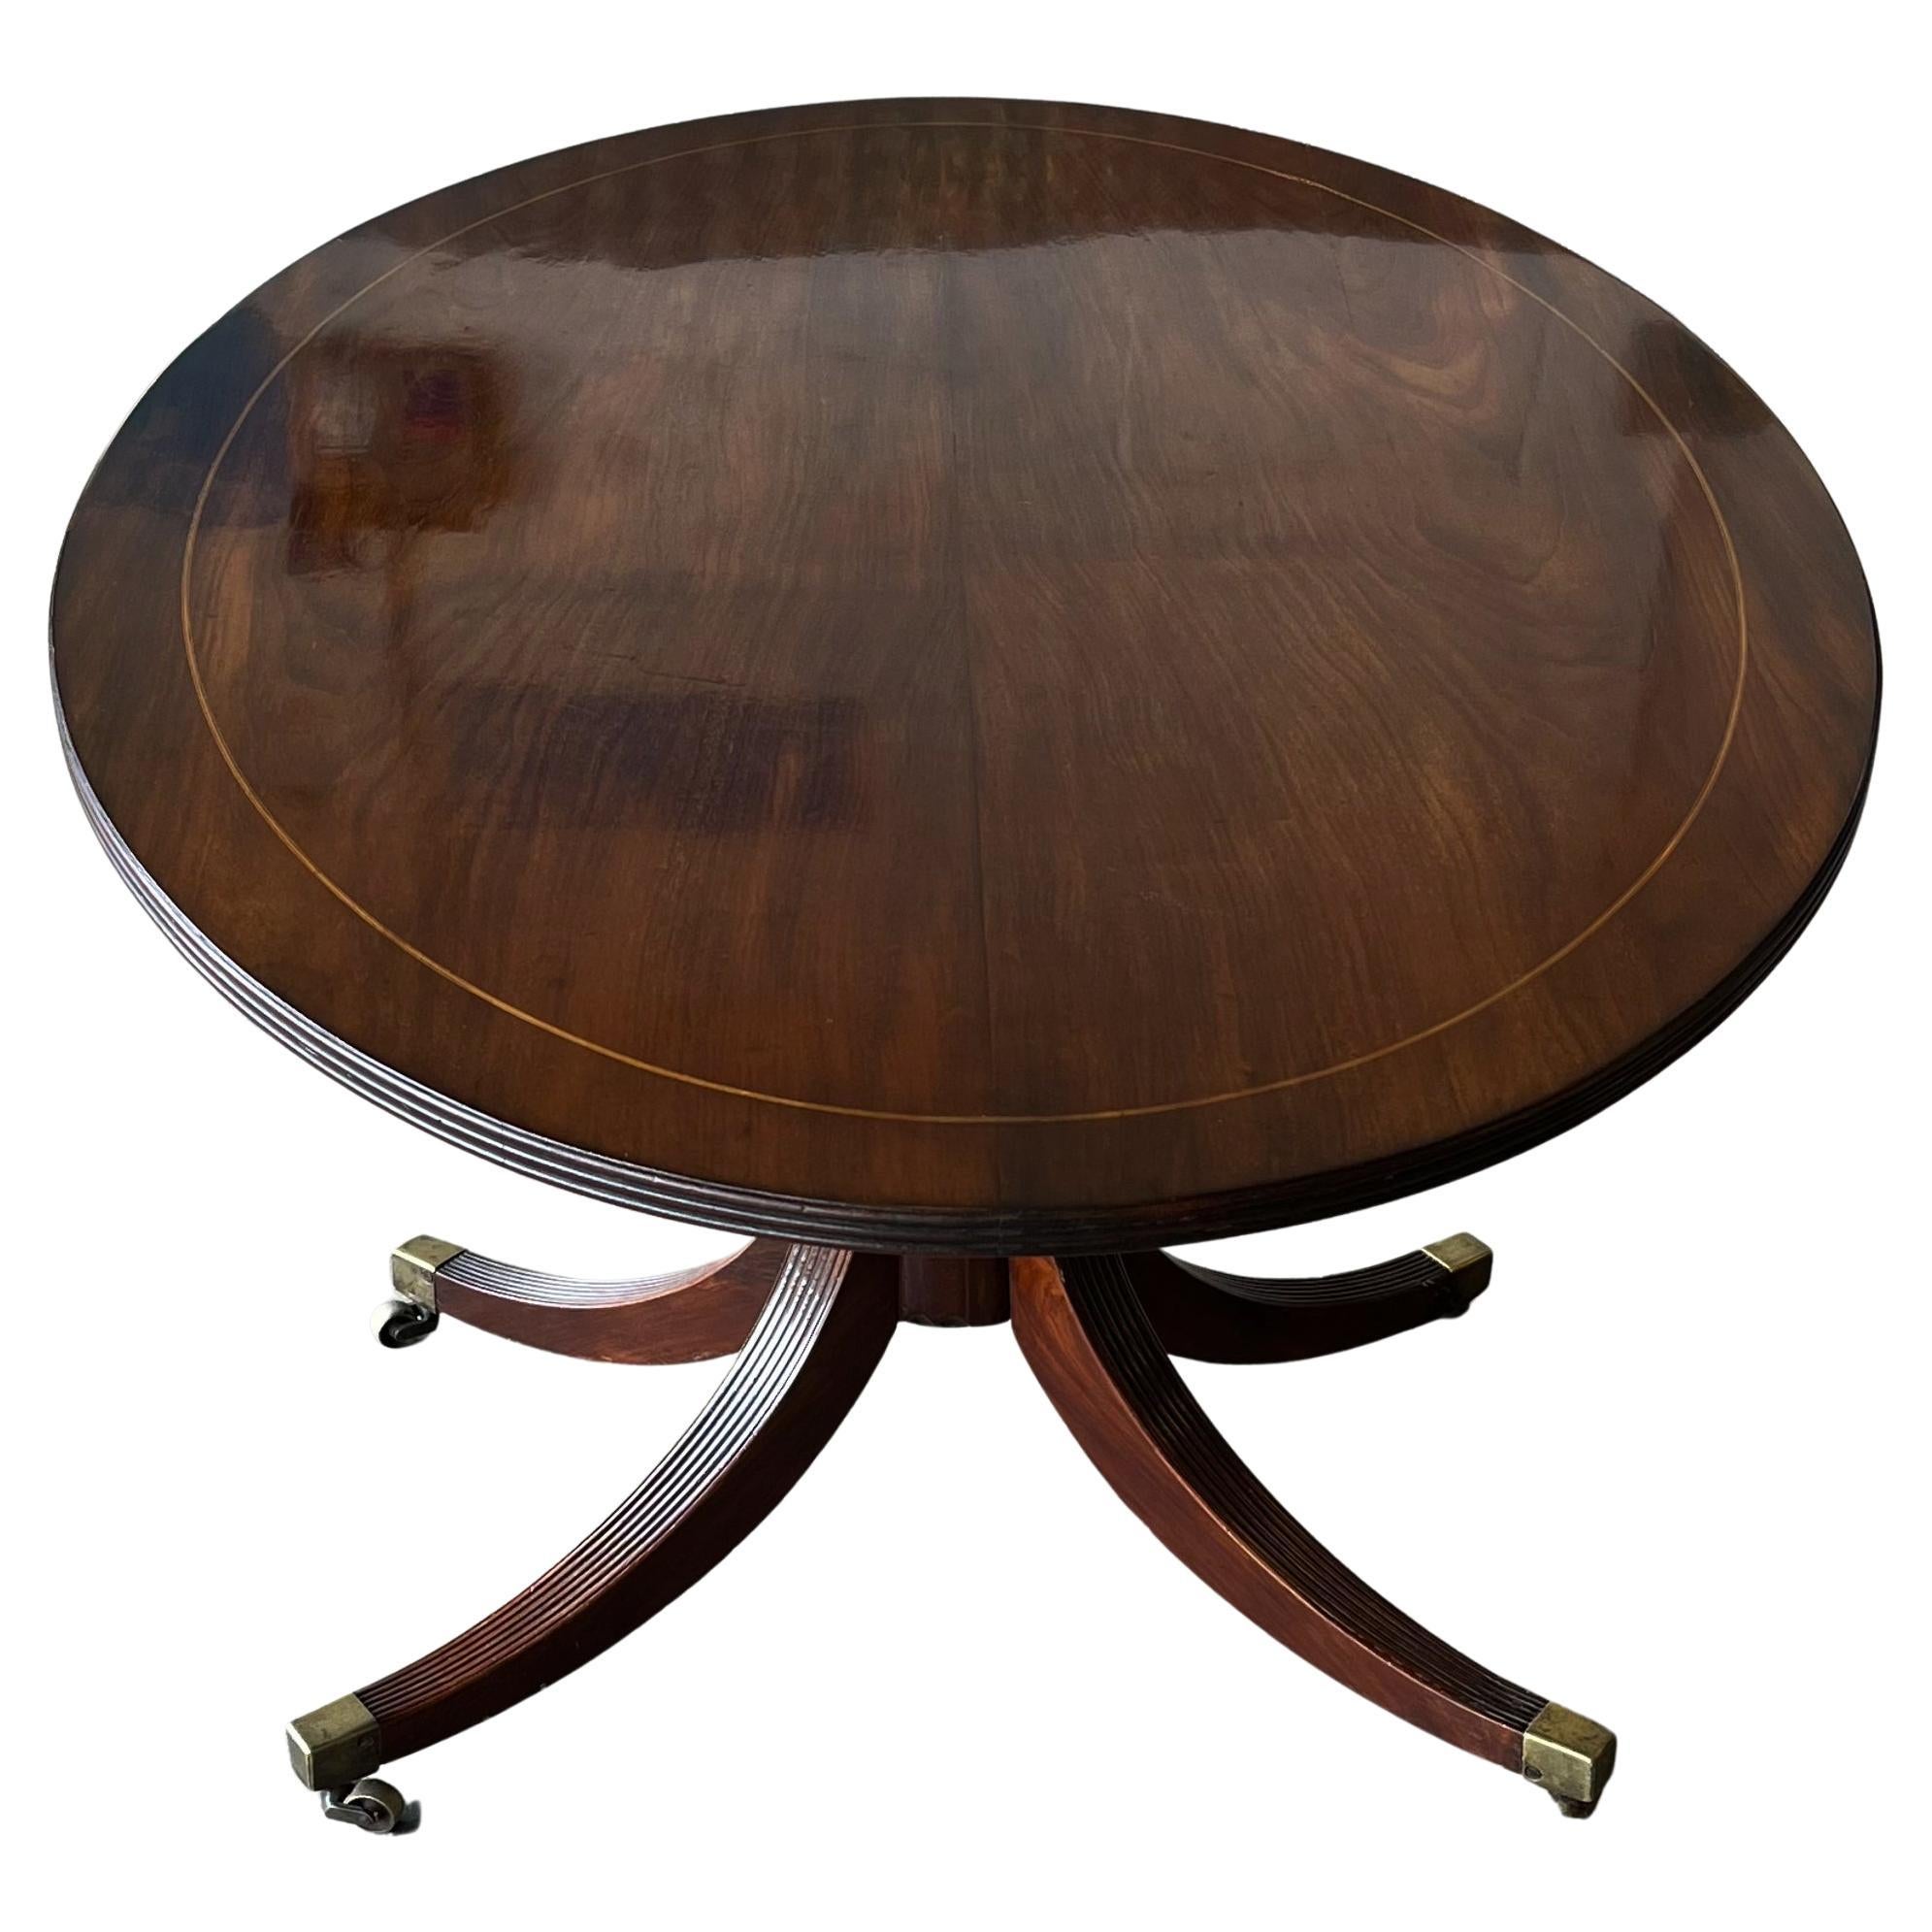 Antique English Regency Mahogany Tilt Top Centre Table Breakfast Table C.1800 In Good Condition For Sale In London, GB